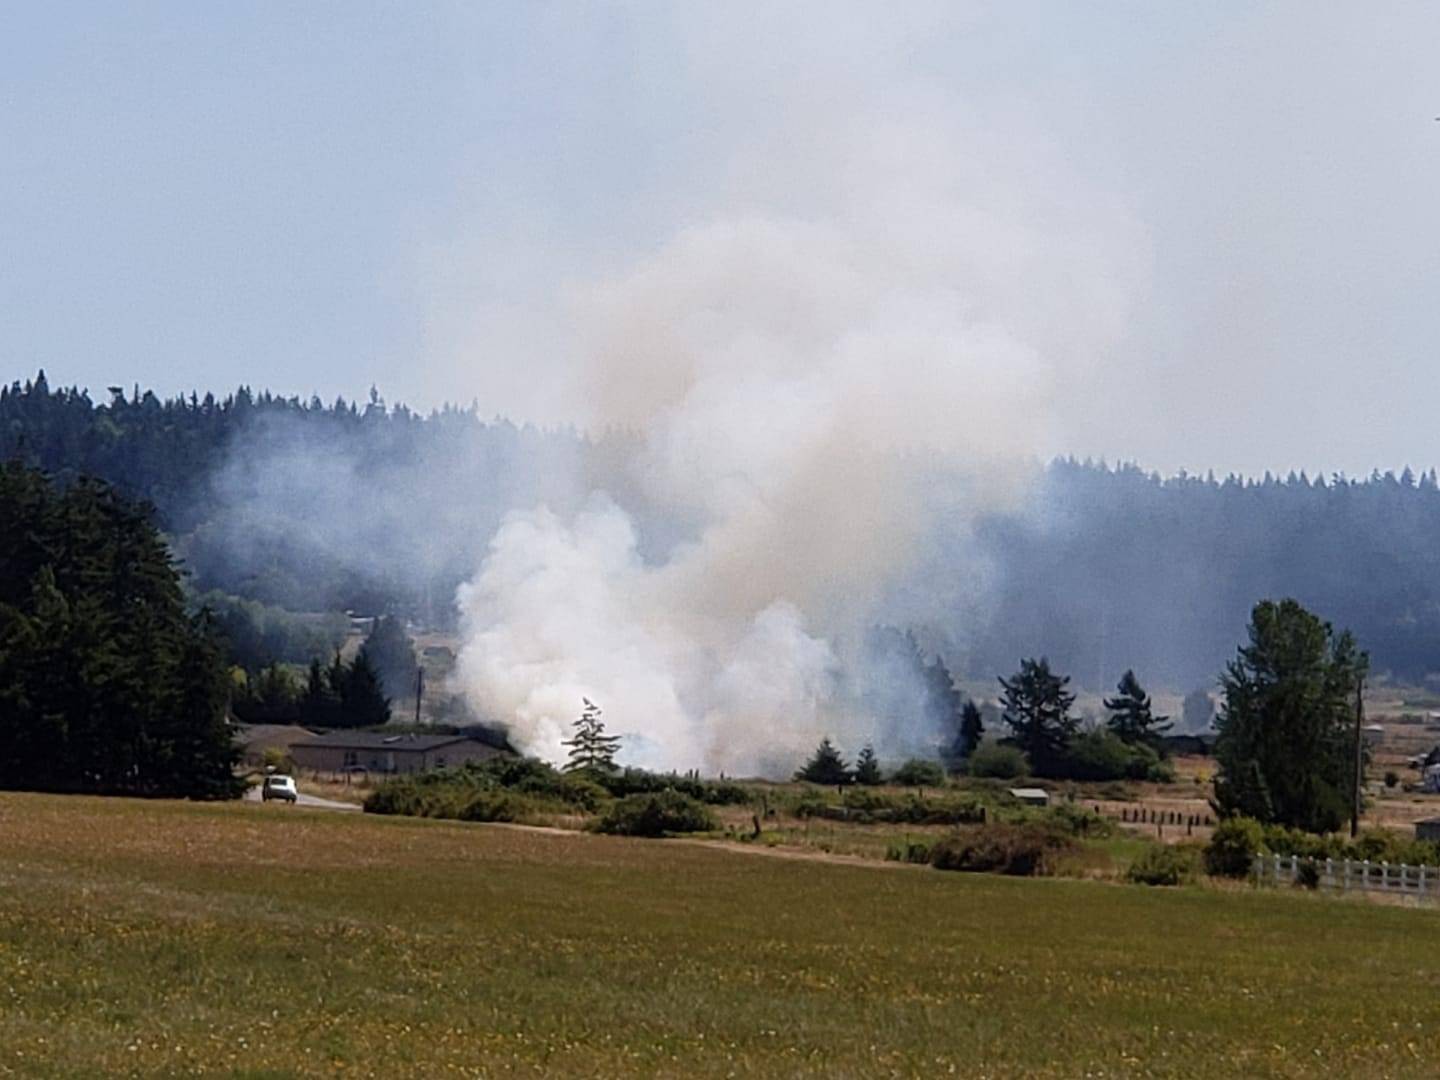 Photo by Sara Hogarth
North Whidbey Fire and Rescue called Navy firefighters for help to extinguish a brush fire near Green Valley Road last Friday.